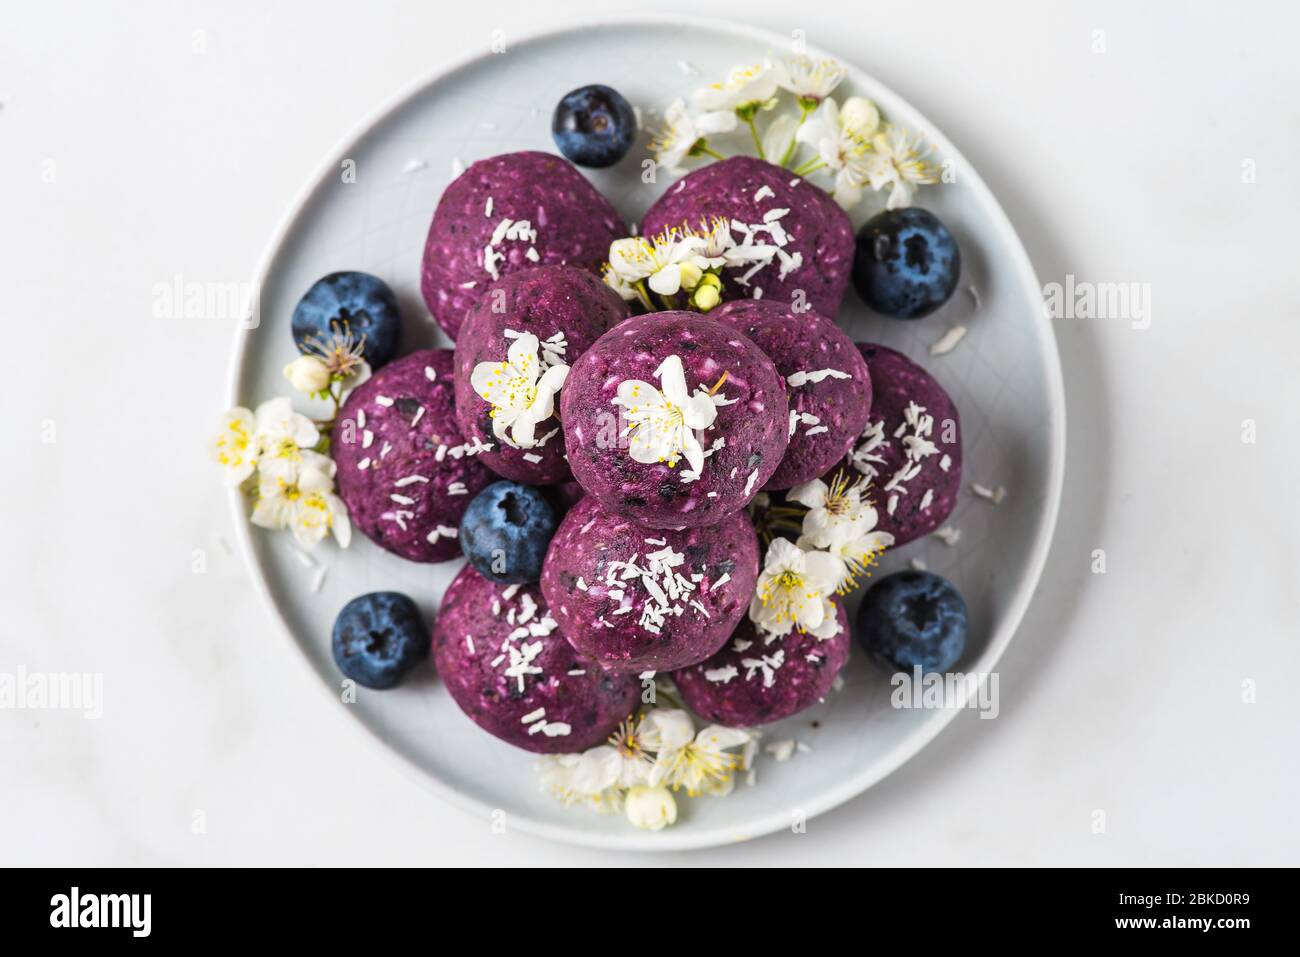 No bake blueberry and acai energy bites or balls made of nuts, coconut flakes and dates served with flowers. top view. healthy vegan food dessert Stock Photo